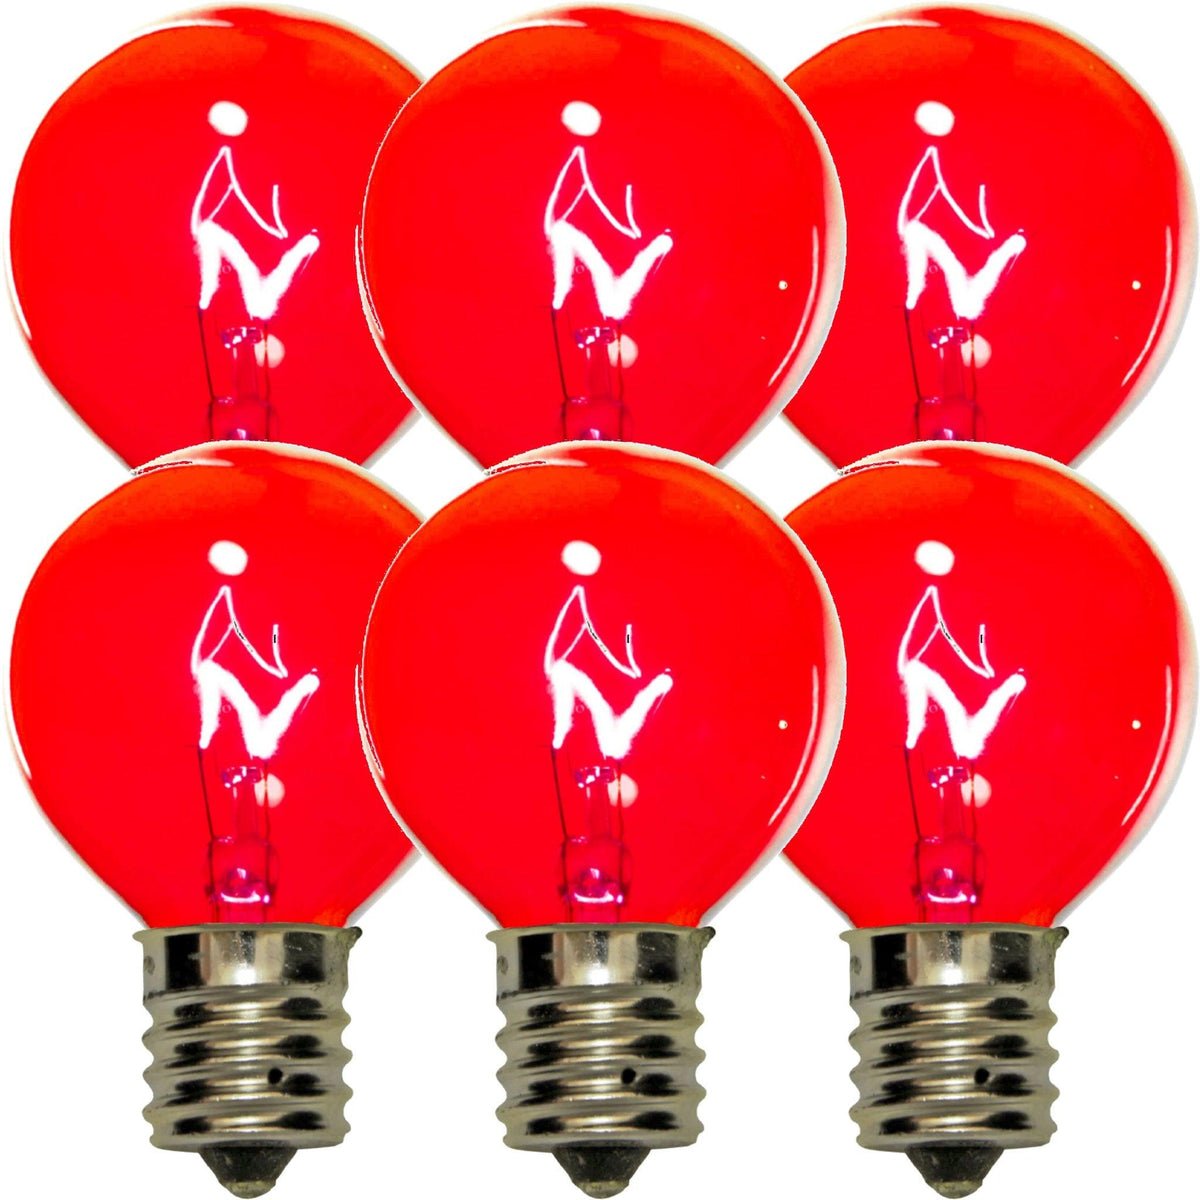 1 Box of 25 of brand new transparent Red G40 Globe Light Bulbs Replace your old bulbs today from leedisplay.com